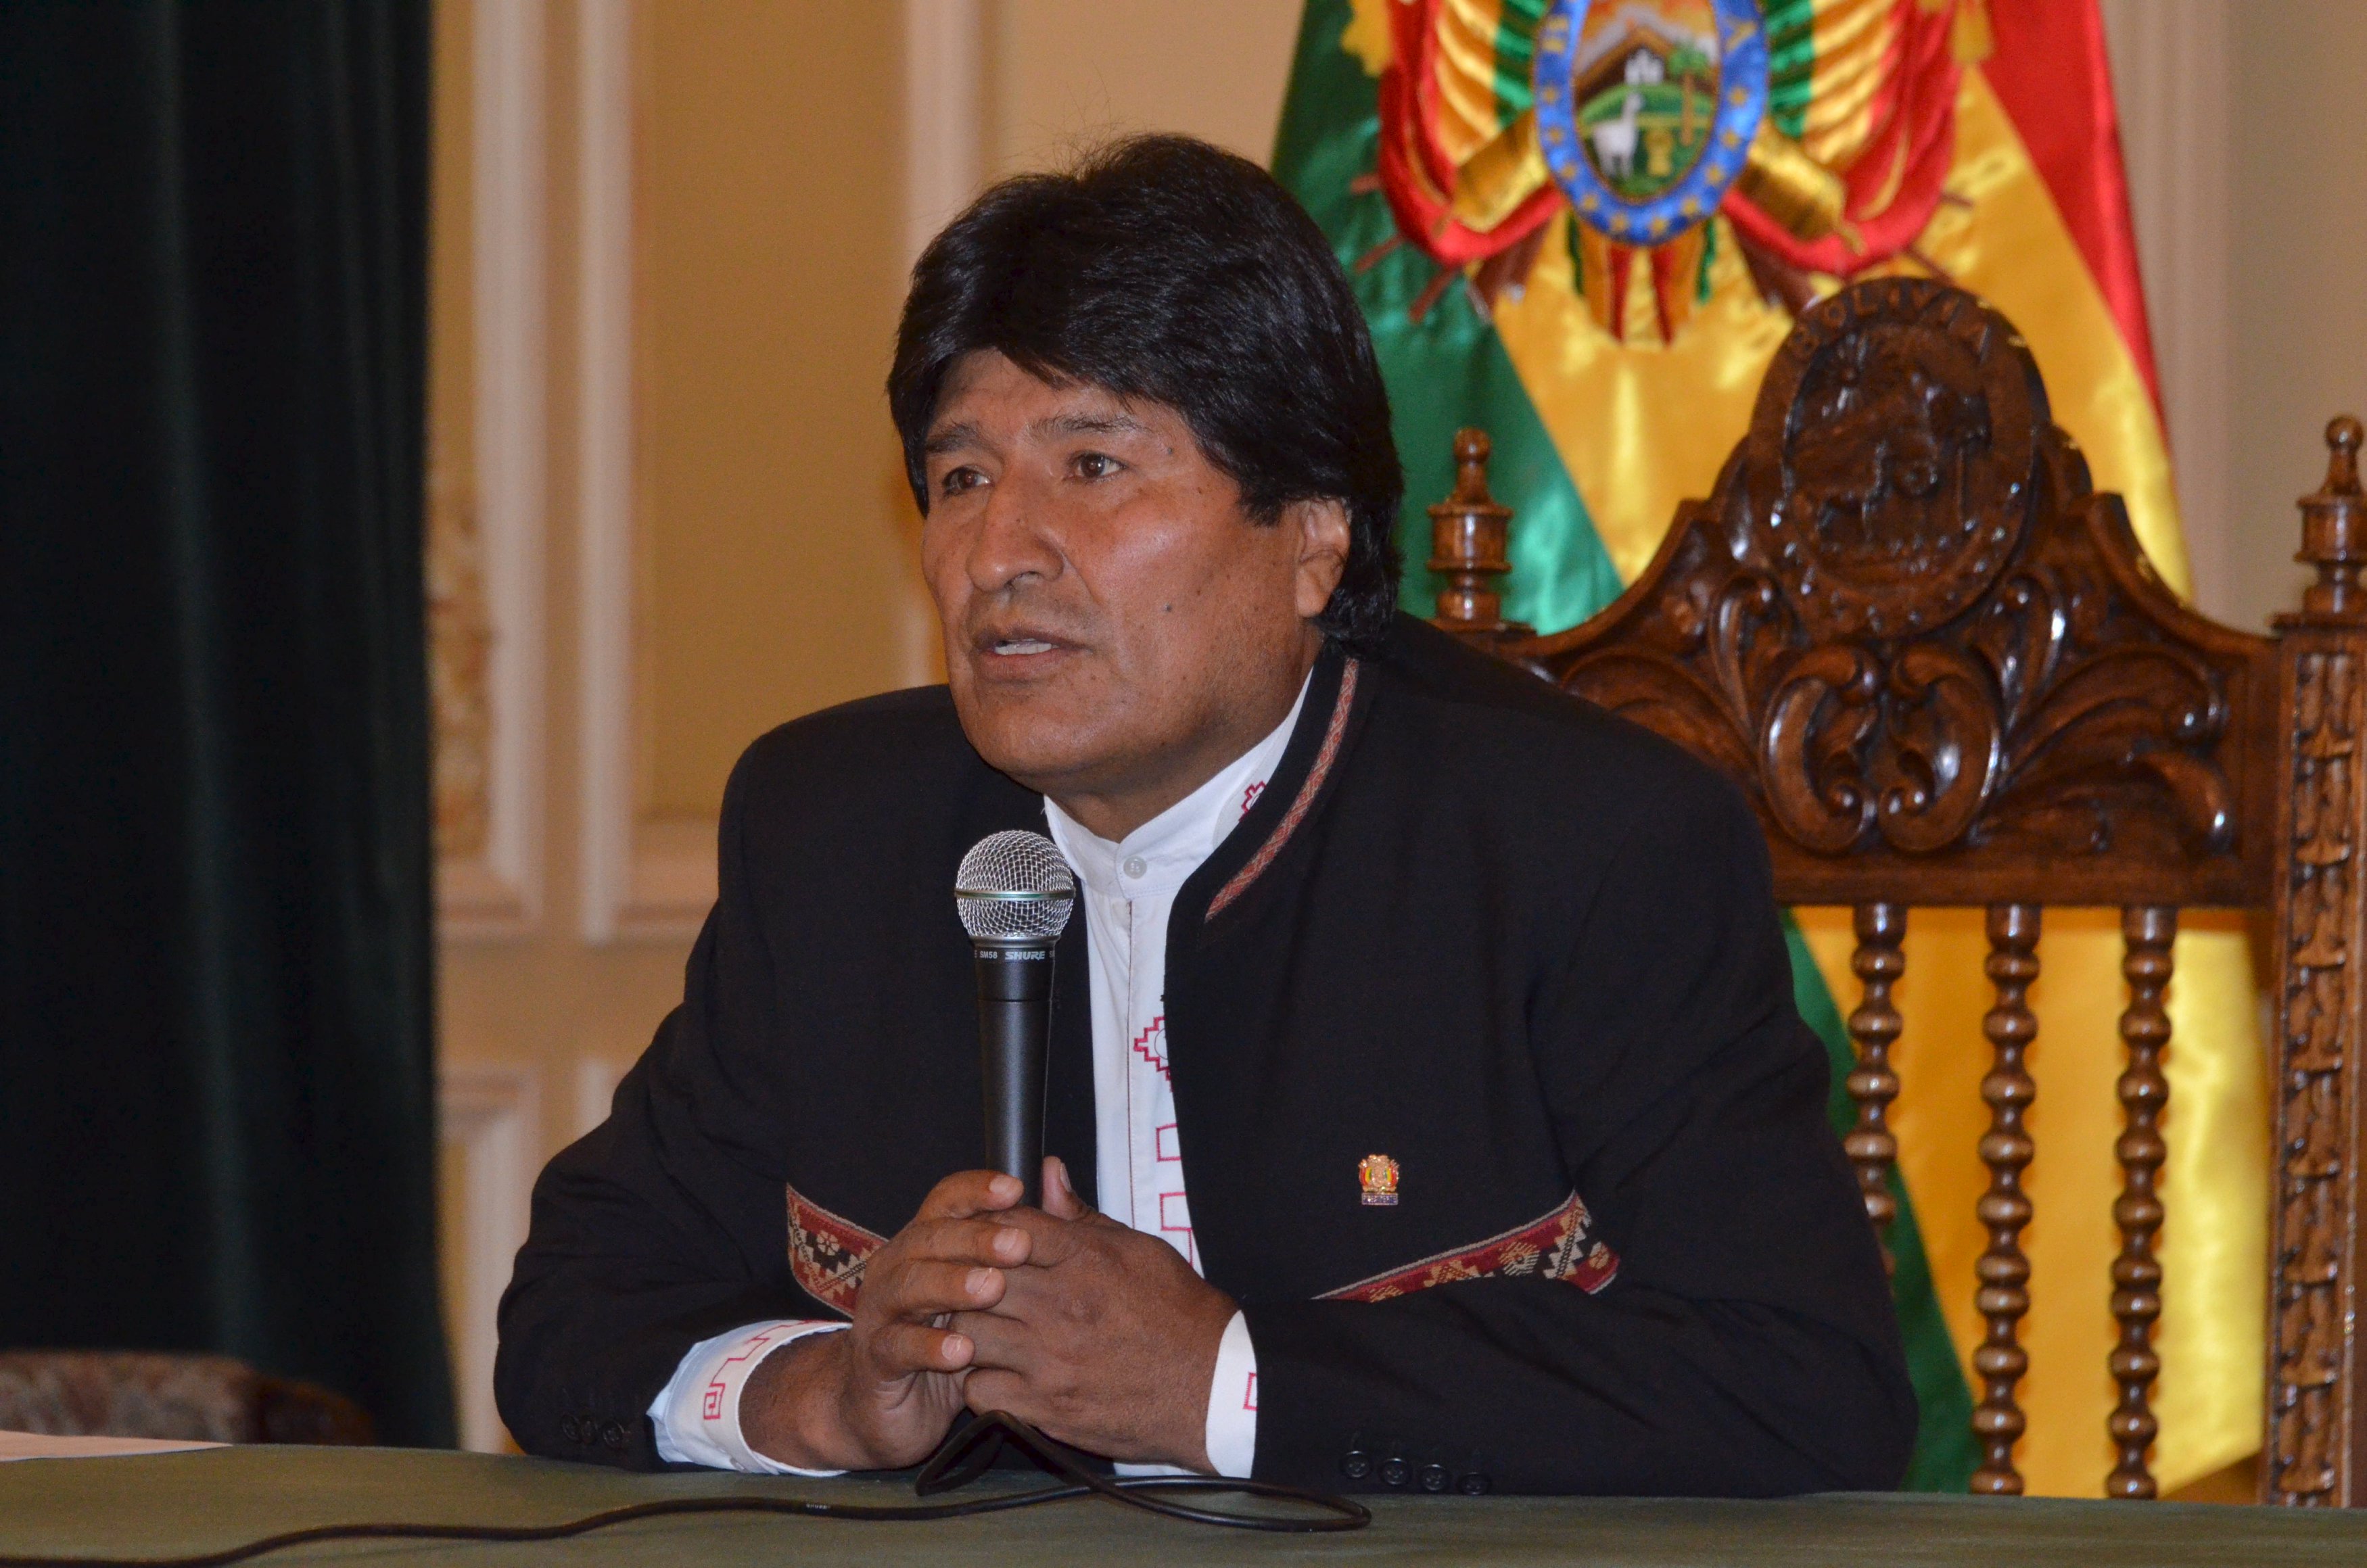 The end of the line for Bolivia's President Morales